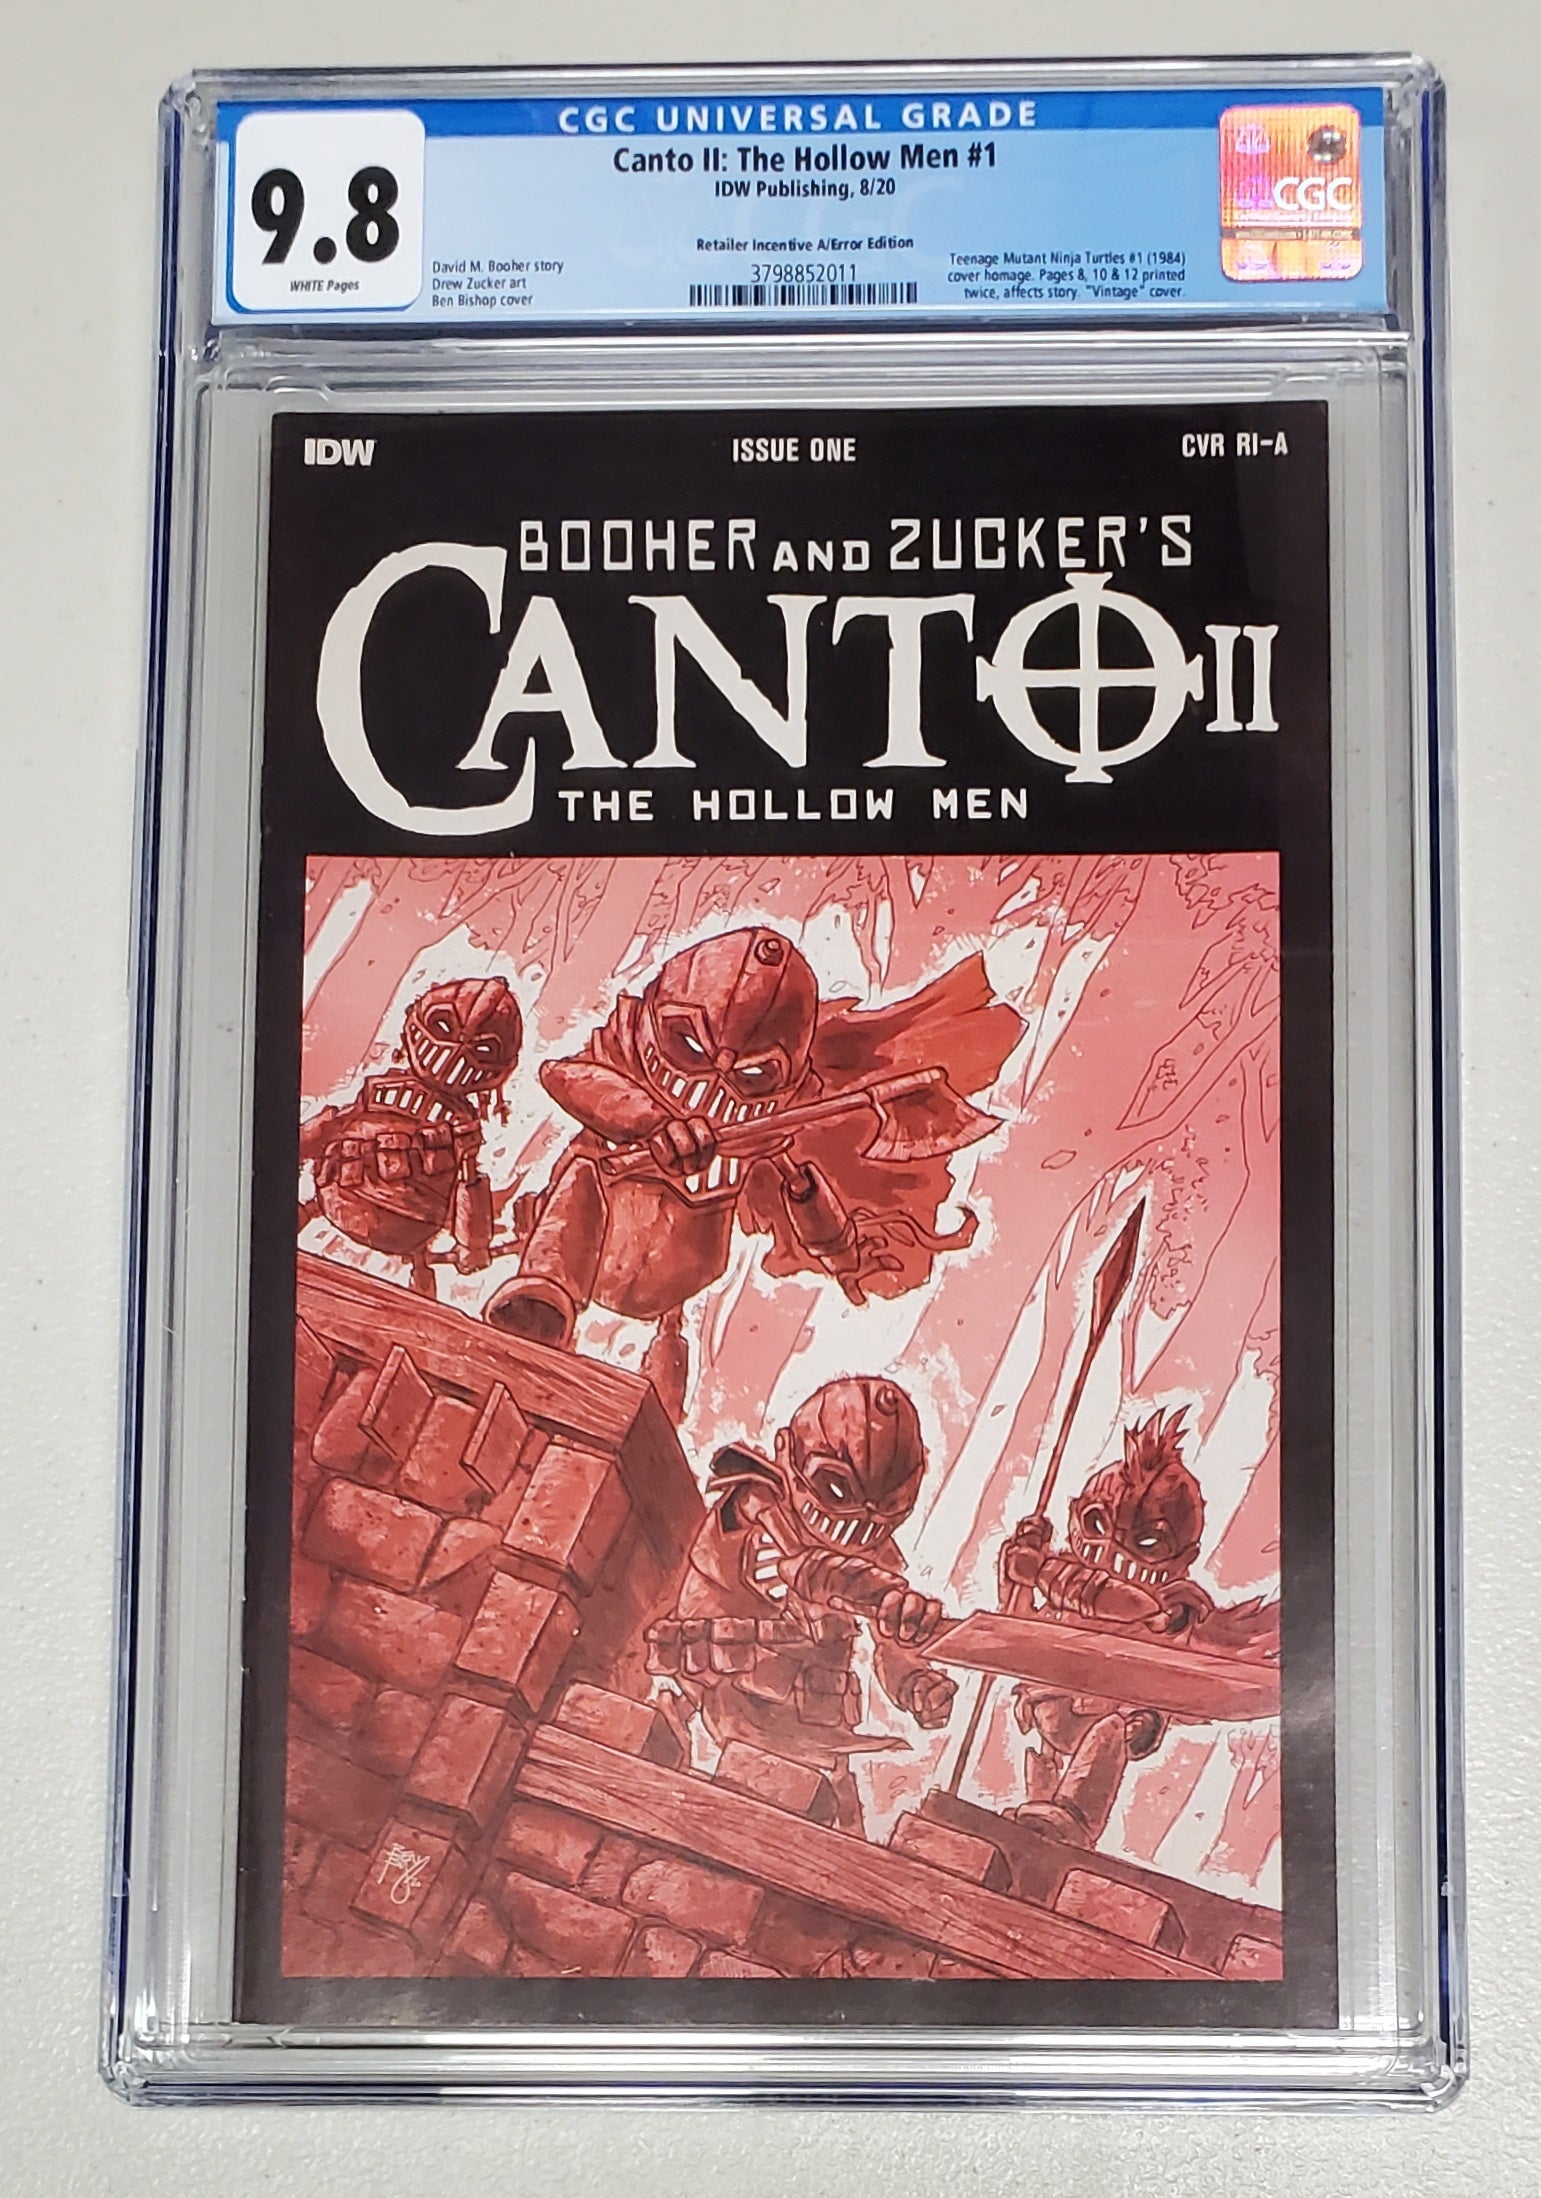 9.8 CGC CANTO II HOLLOW MEN #1 1:10 TMNT HOMAGE VARIANT (ERROR EDITION) [3798852011] (NOT LISTED) Canto IDW   